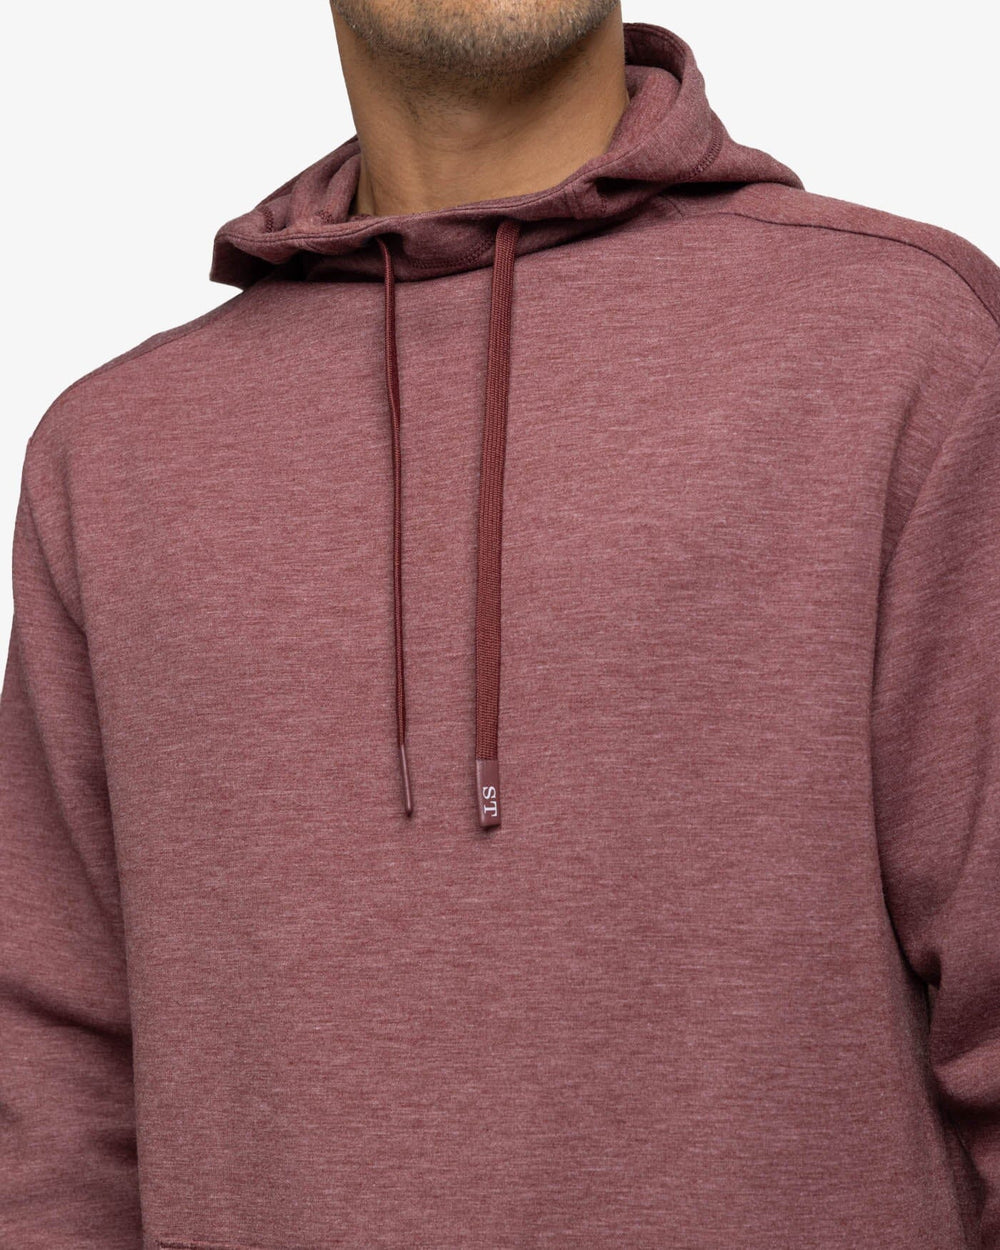 The detail view of the Southern Tide Stratford Heather Interlock Hoodie by Southern Tide - Heather Bordeaux Red